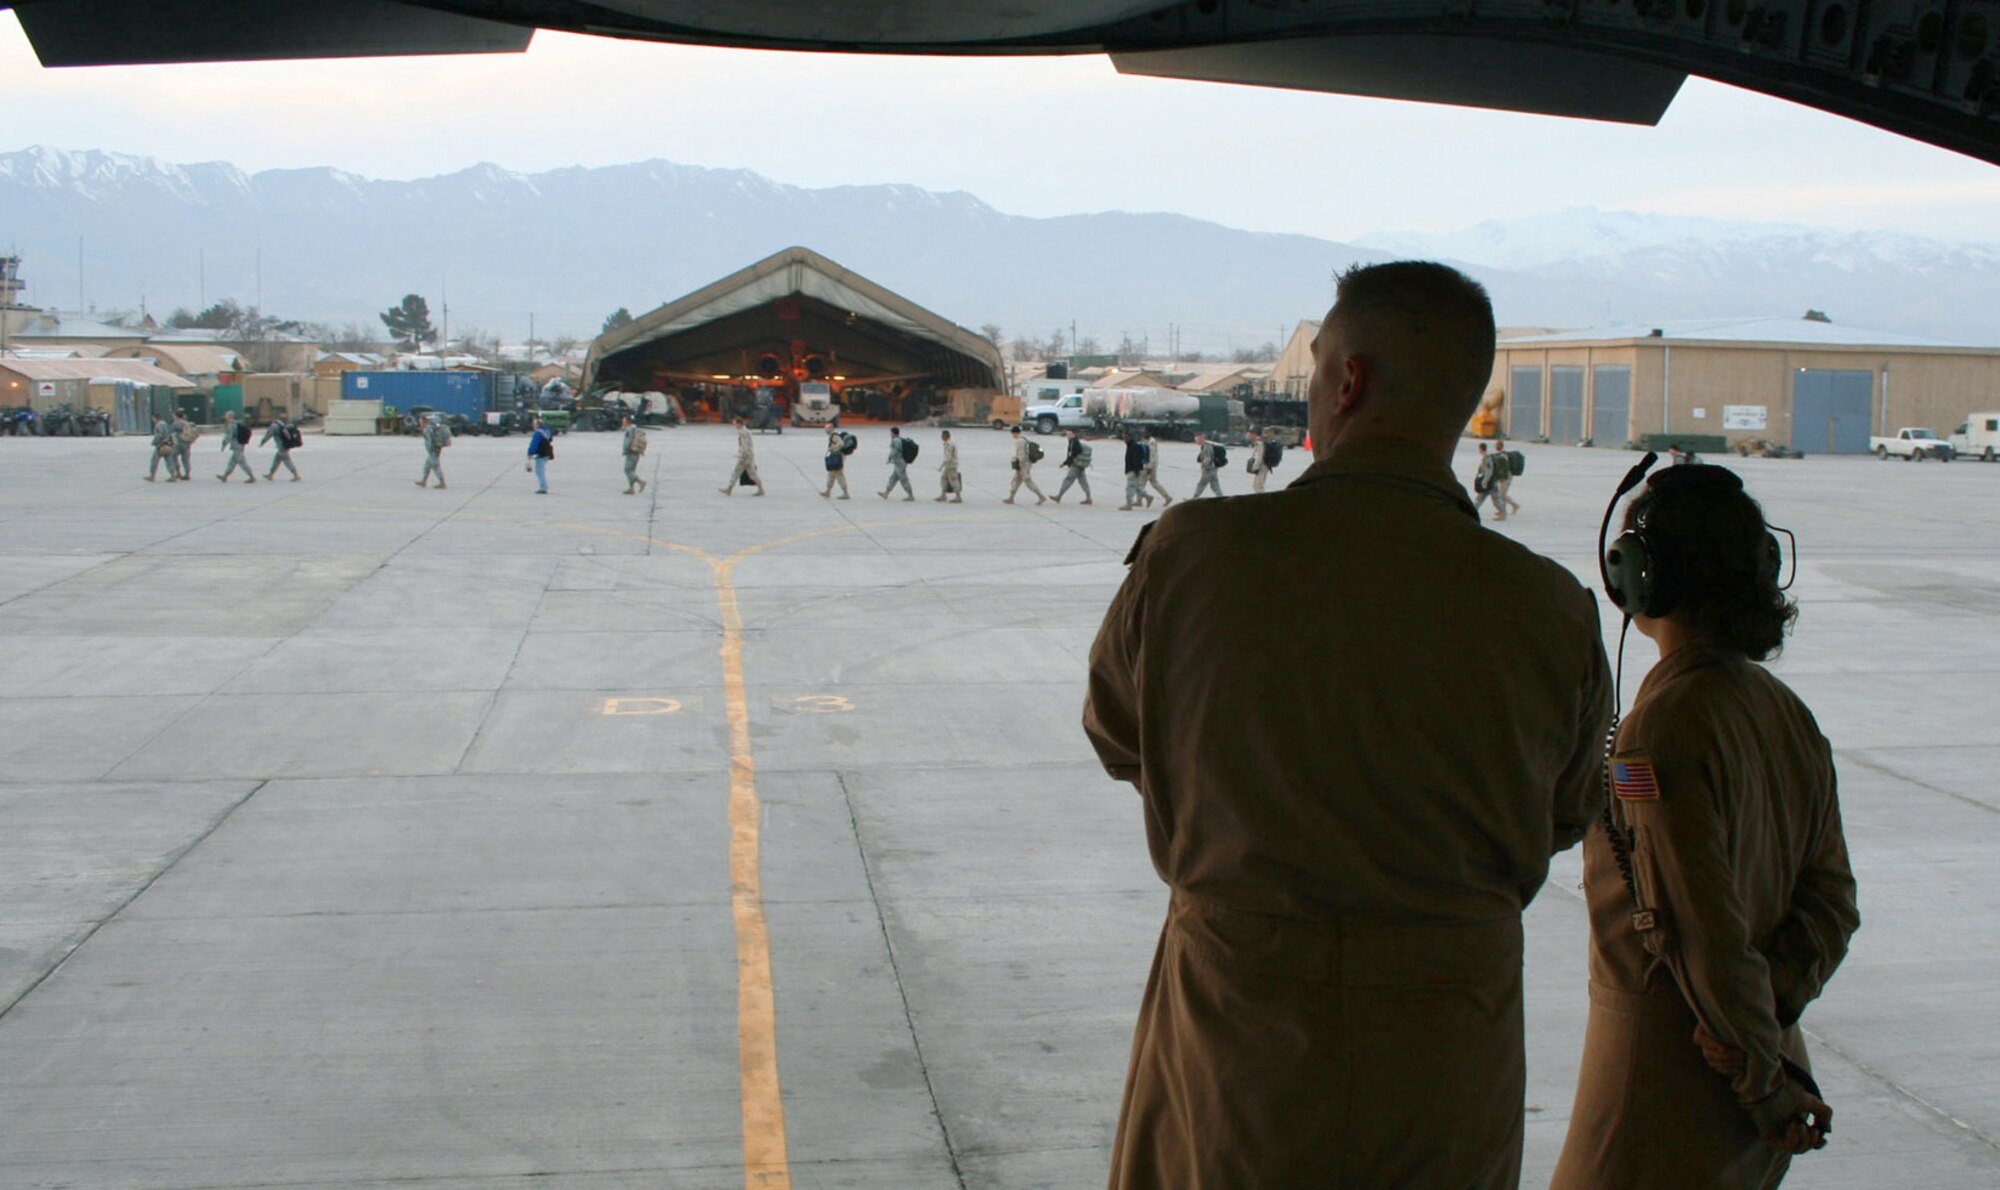 Airmen 1st Class Jesse Doyle and Suzanne Van Elk, loadmasters, watch Soldiers make their way across the flightline after disembarking the C-17 Globemaster III that completed the final leg of their journey to Bagram Air Base, Afghanistan. Airman Doyle and Airman Van Elk are deployed from McChord Air Force Base, Wash. (U.S. Air Force photo)